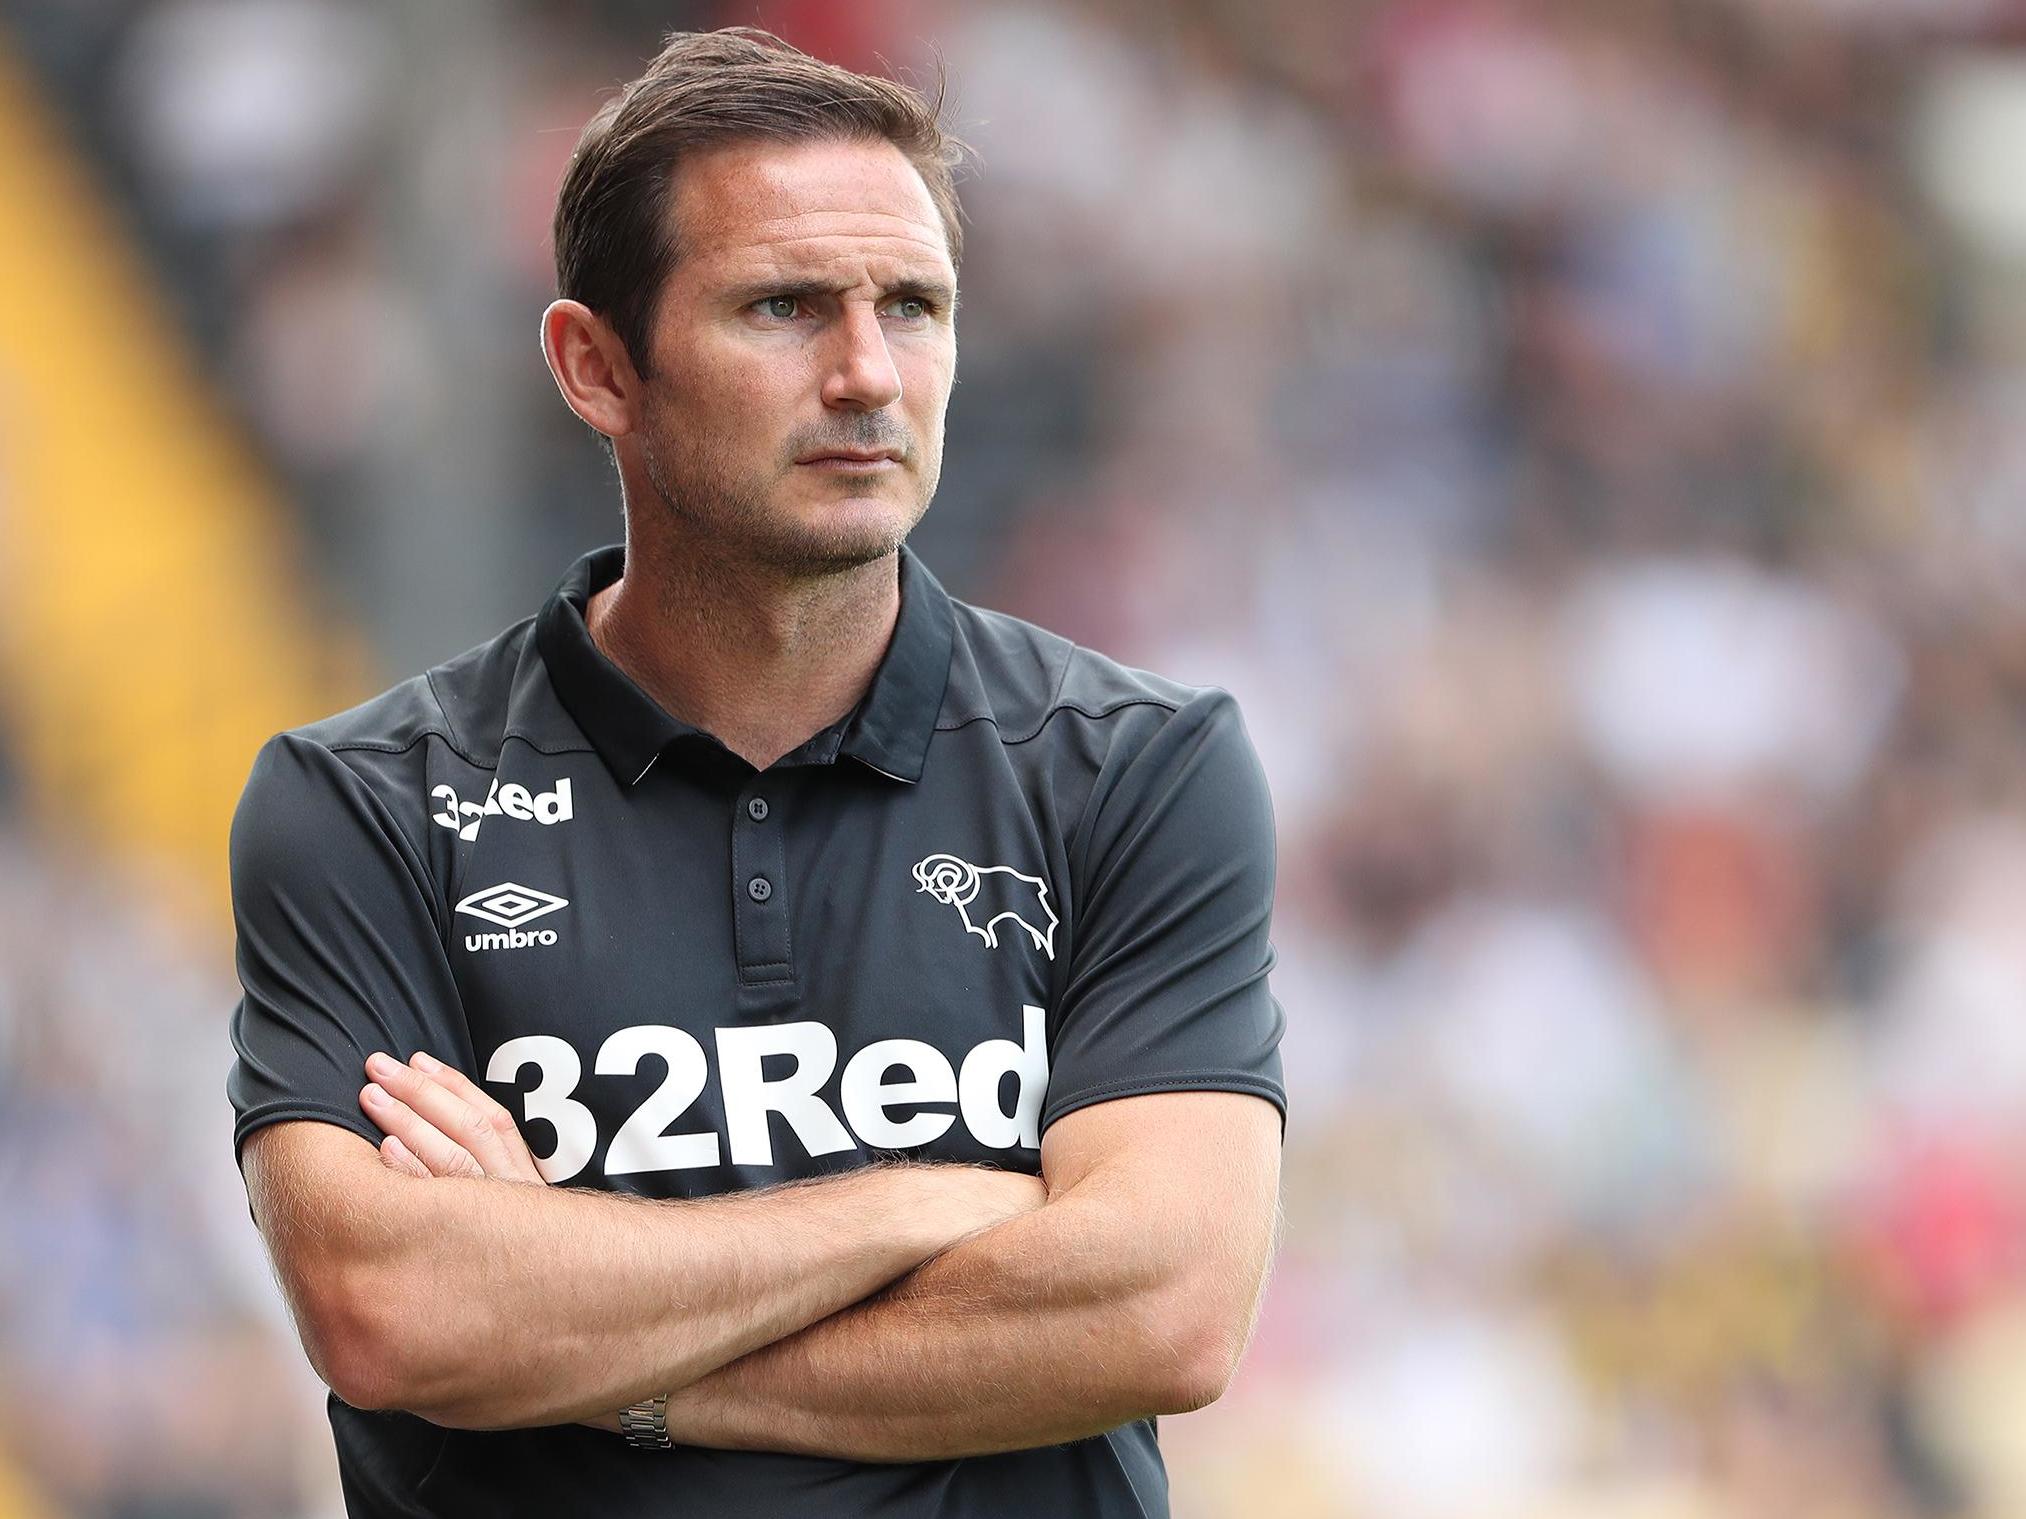 Championship 2018-19 season preview: Stoke favourites but Frank Lampard and Marcelo Bielsa are curious unknowns